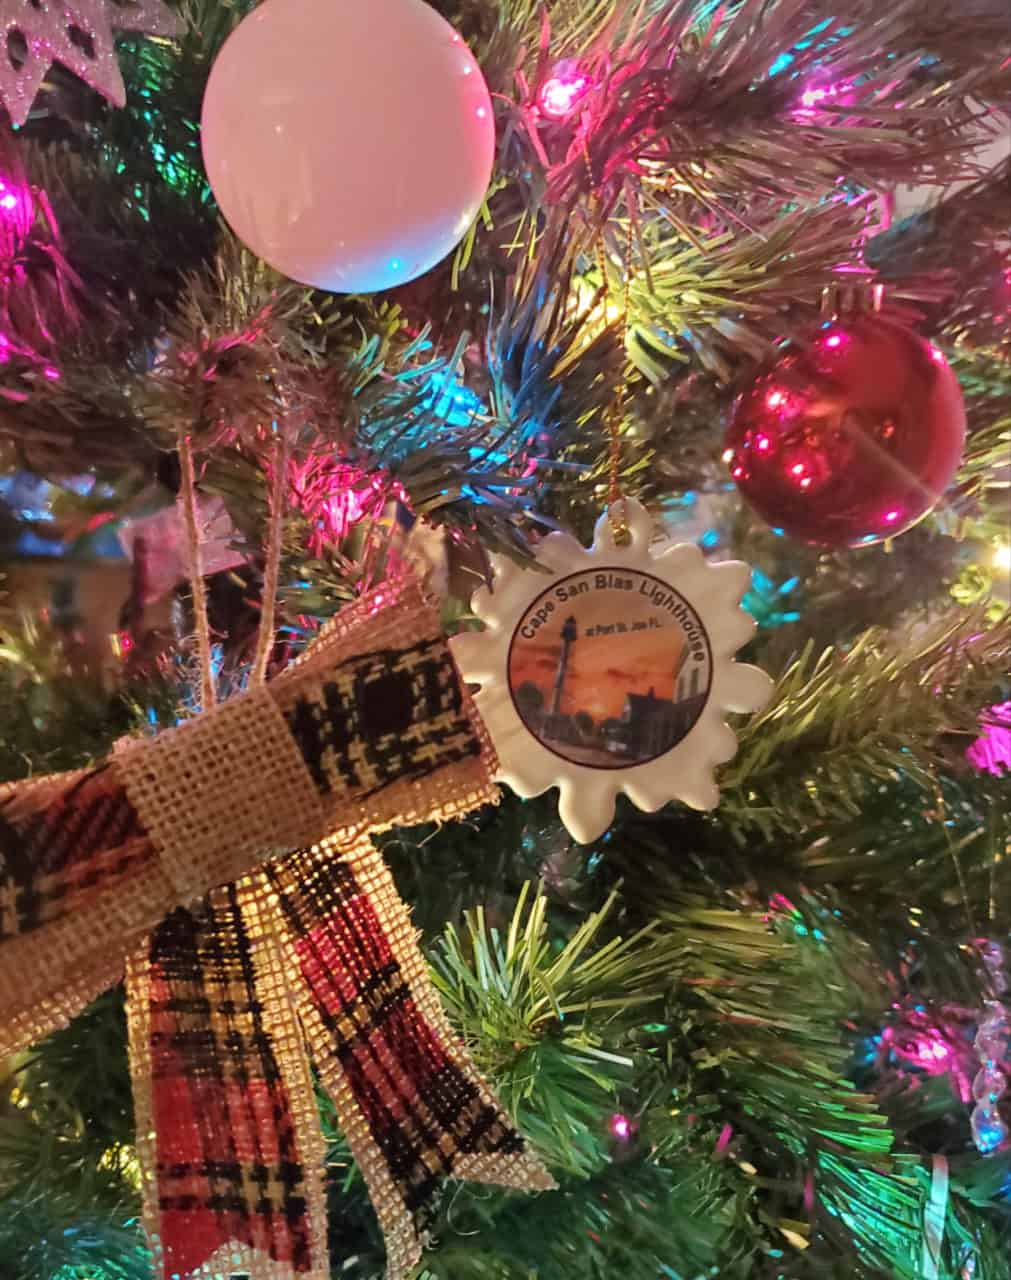 Up close picture of our ornament from Cape San Blas Lighthouse from Port St. Joe